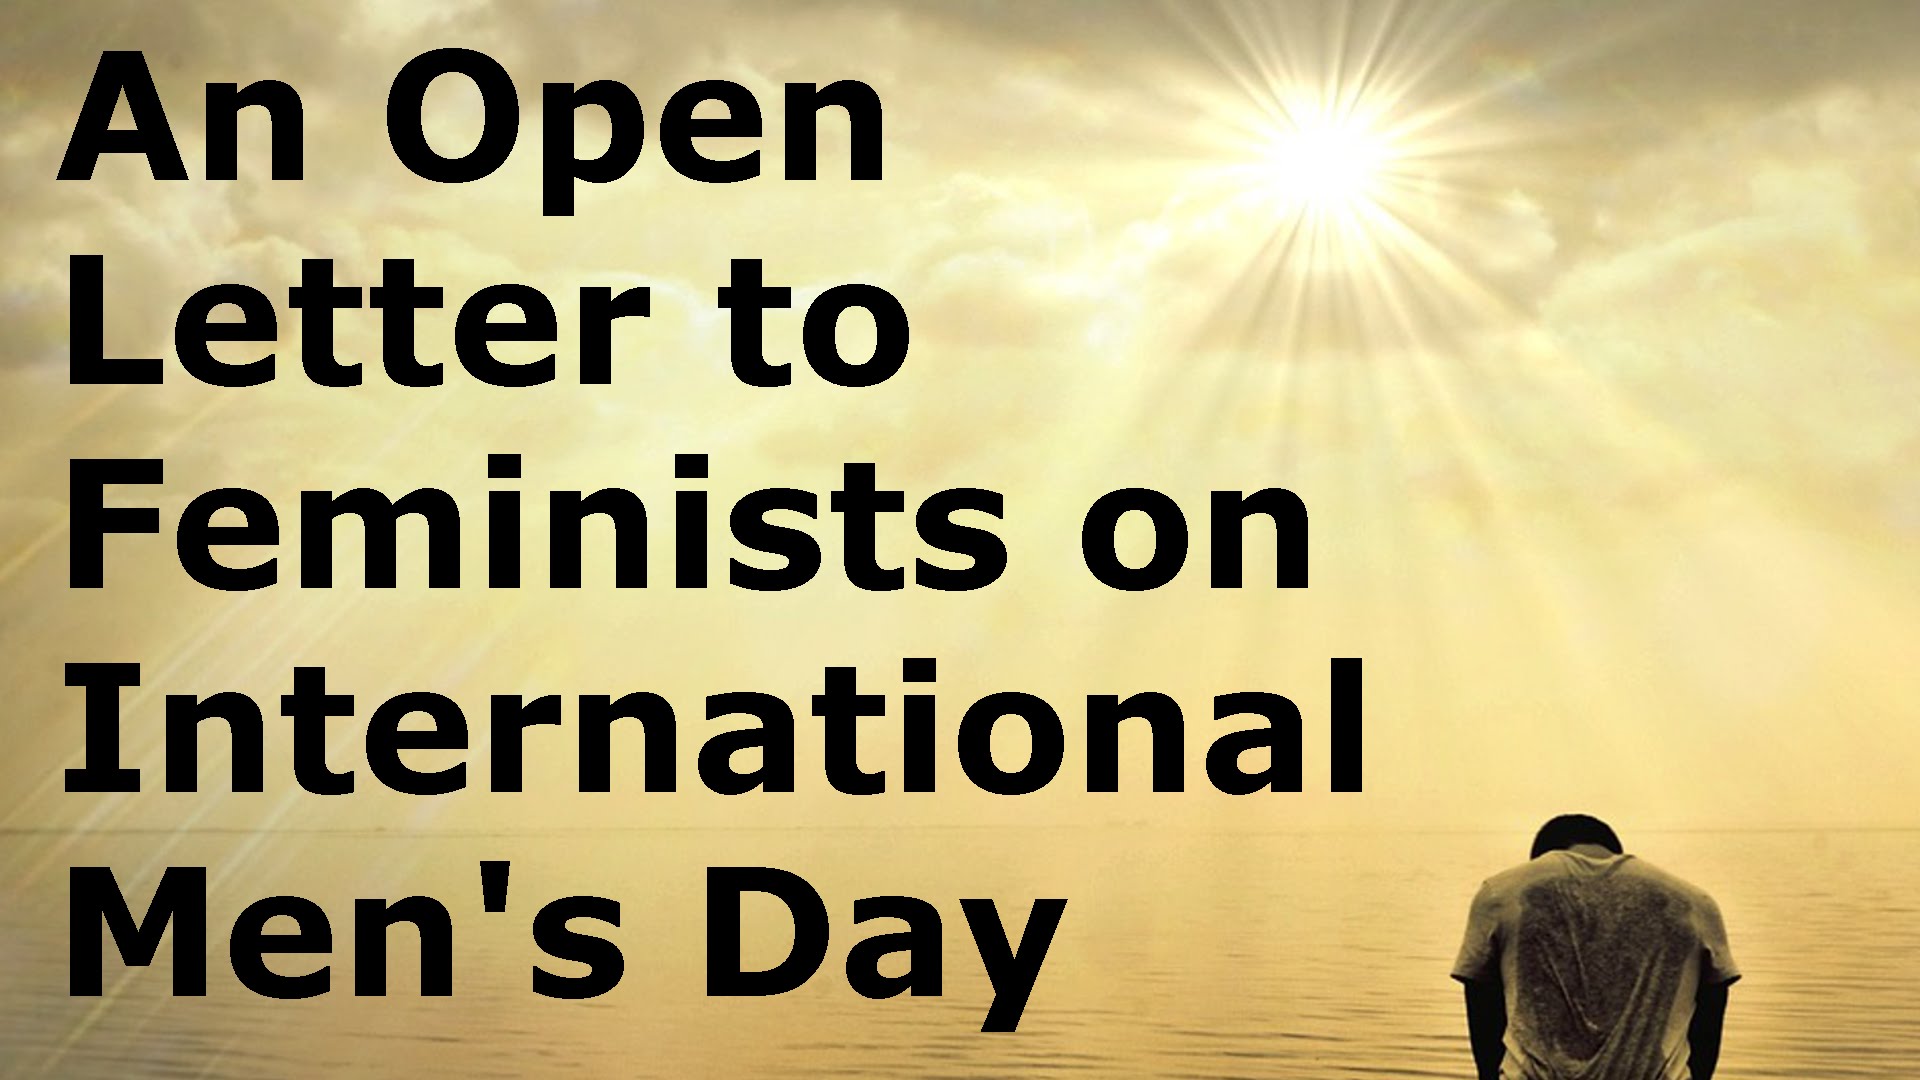 An Open Letter to Feminists on International Men’s Day